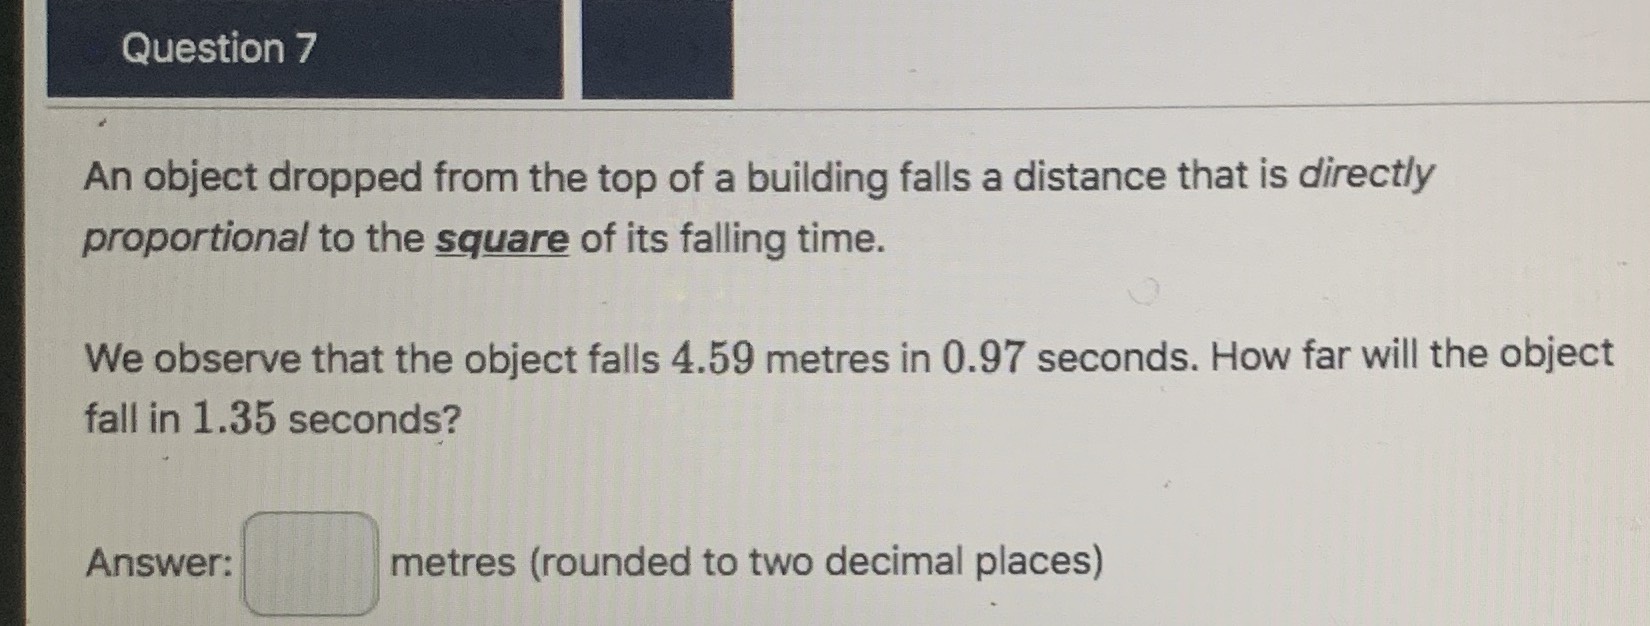 An object dropped from the top of a building falls...